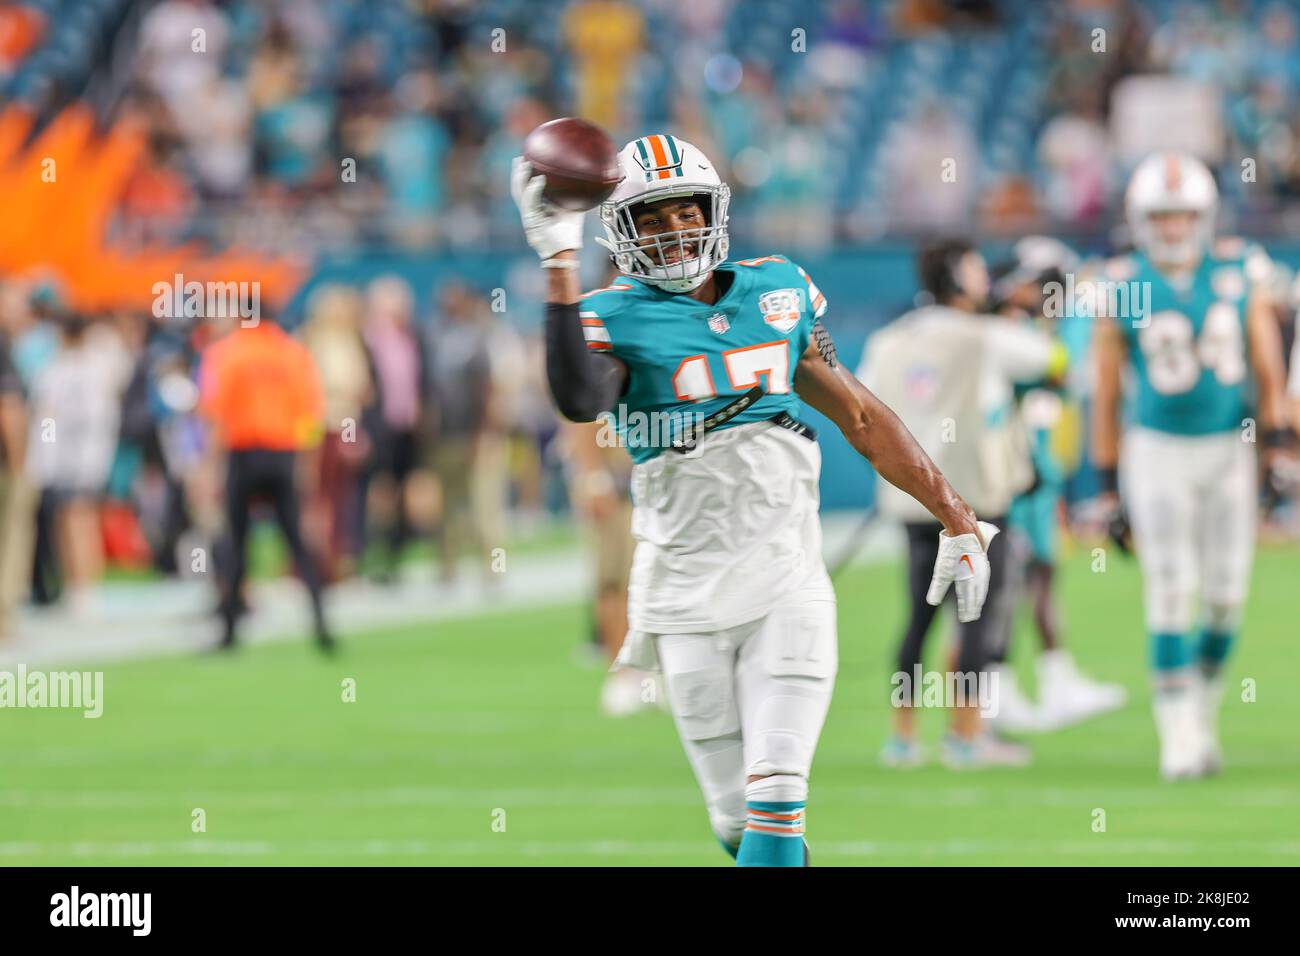 Sunday, October 23, 2022; Miami Gardens, FL USA;  during an NFL game at Hard Rock Stadium. The Dolphins beat the Steelers 16-10. (Kim Hukari/Image of Stock Photo